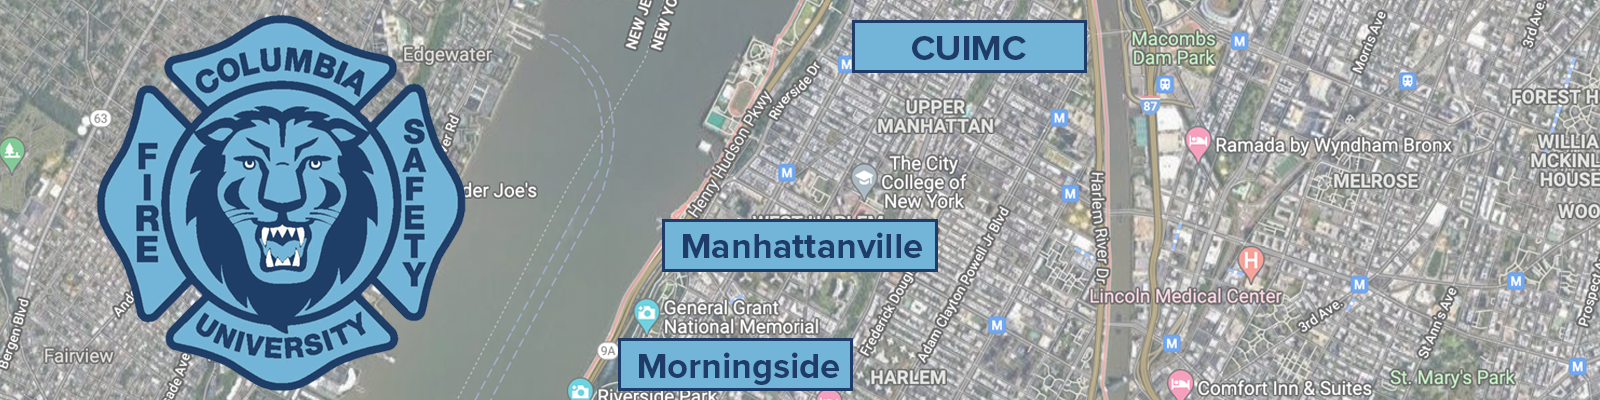 Map of upper manhattan with CU Fire Safety badge overlaid.